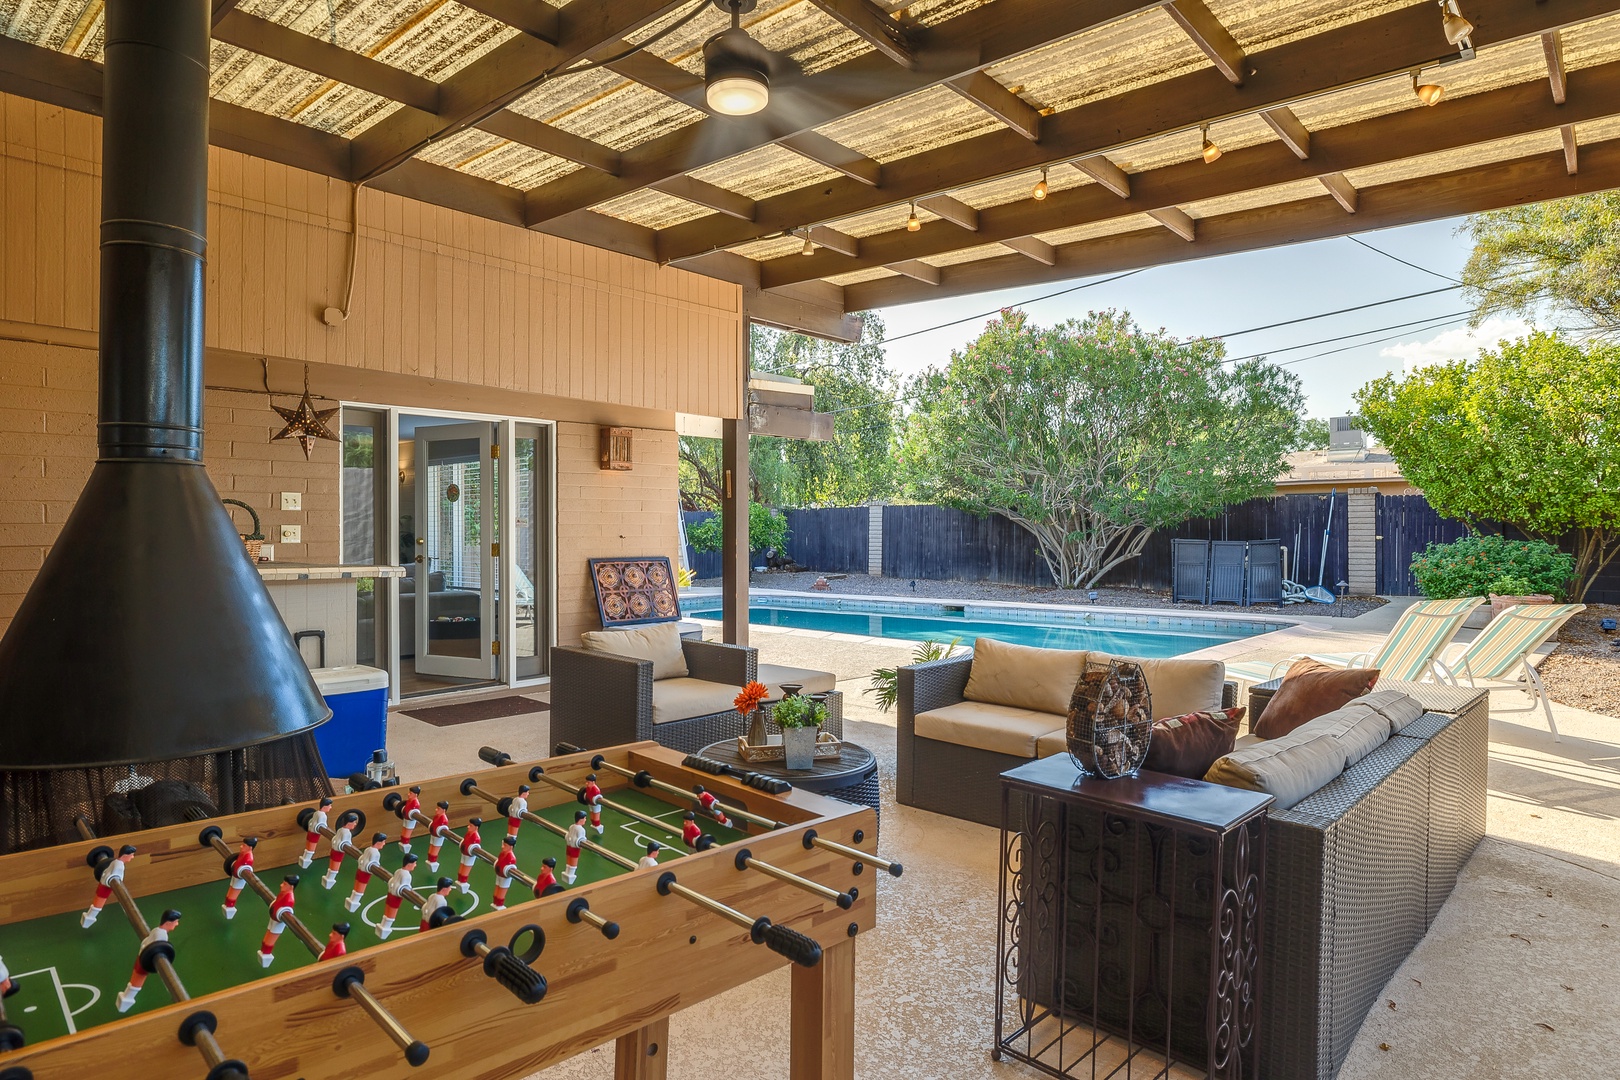 Foosball and covered patio lounge area